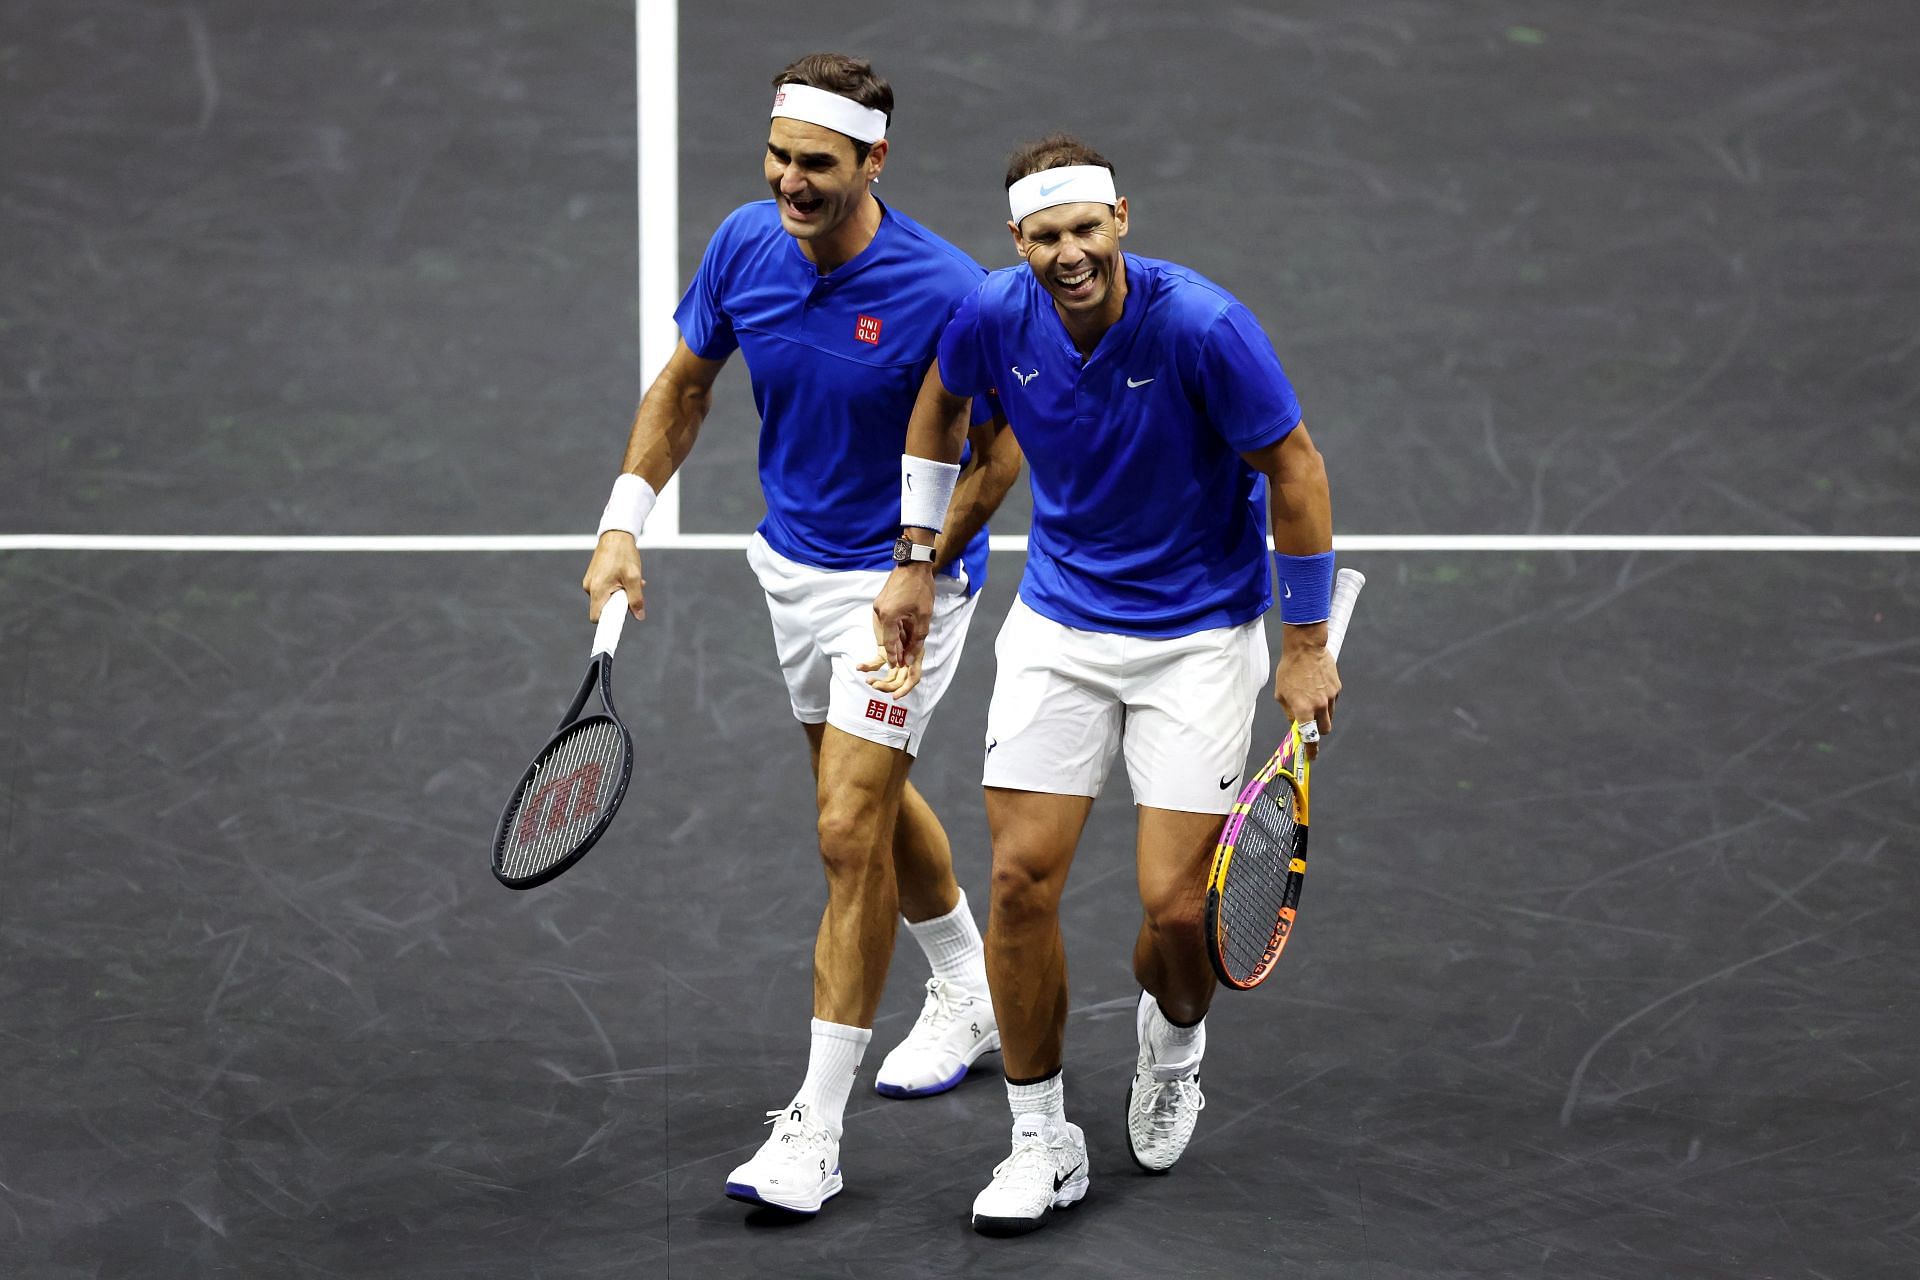 Laver Cup 2022 - Day One - Getty Images